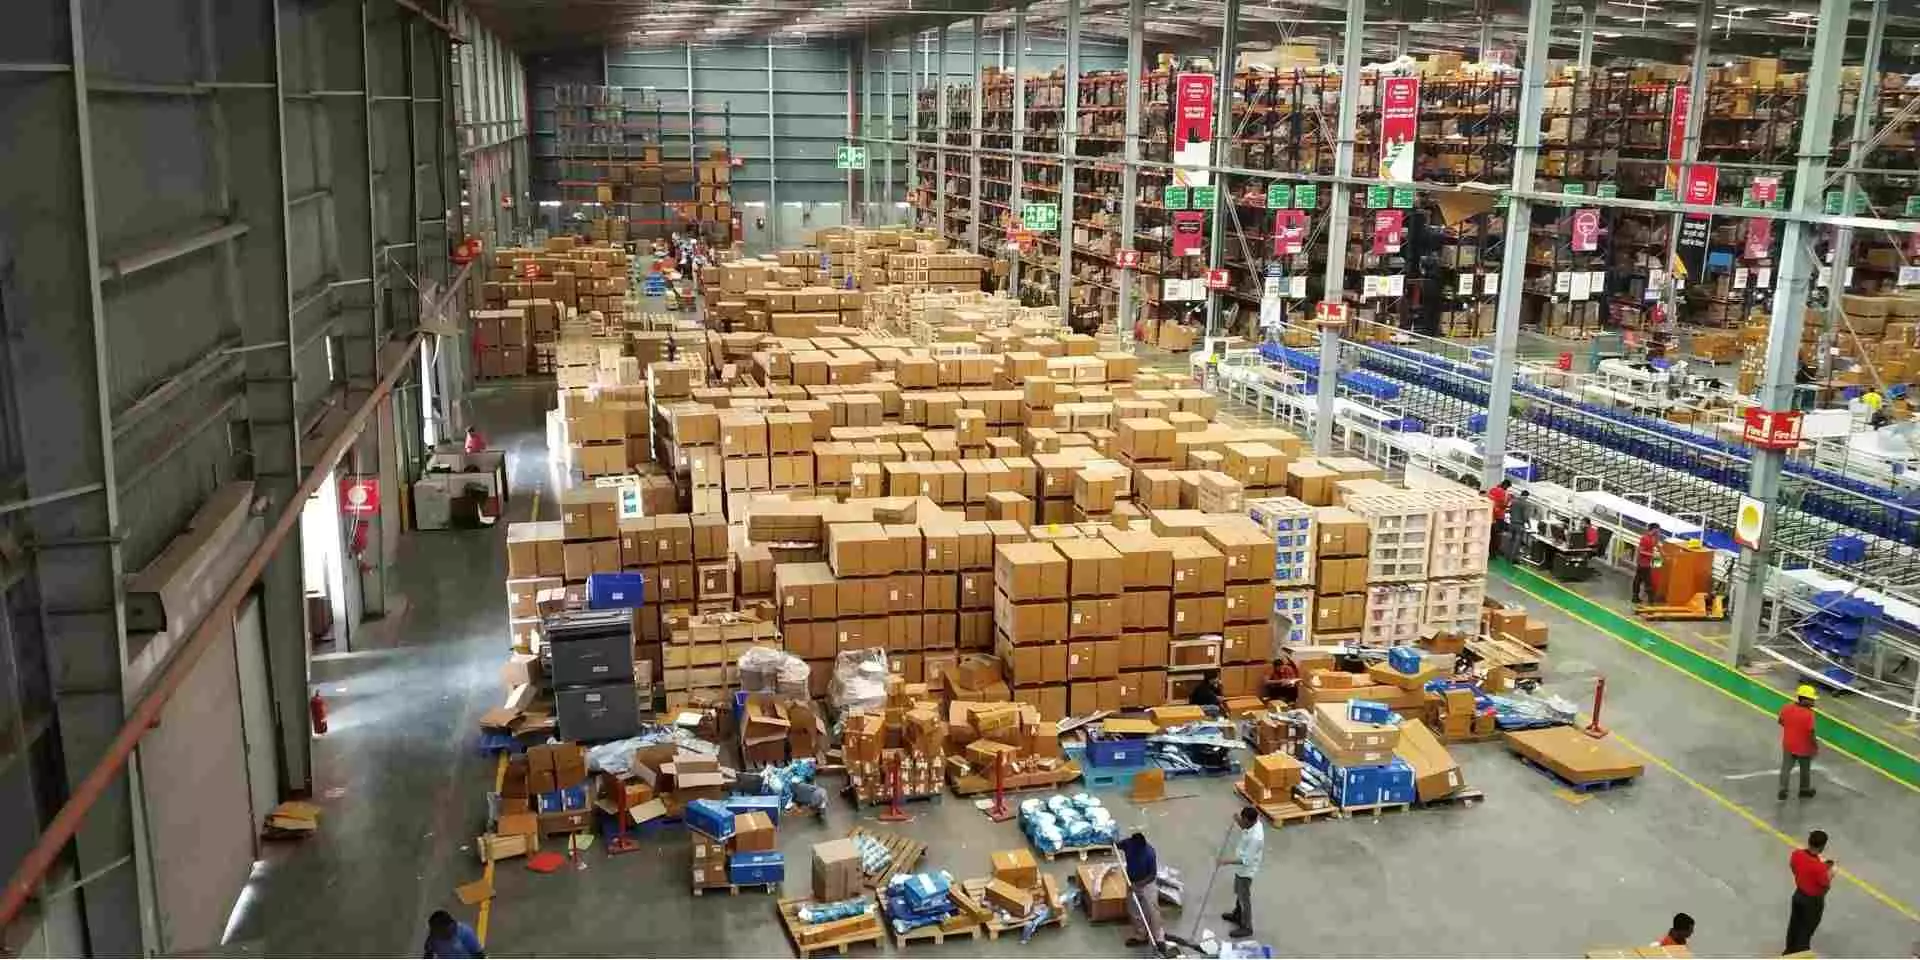 Stellar Value Chain Solutions to invest ₹200 crores in D2C fulfillment space